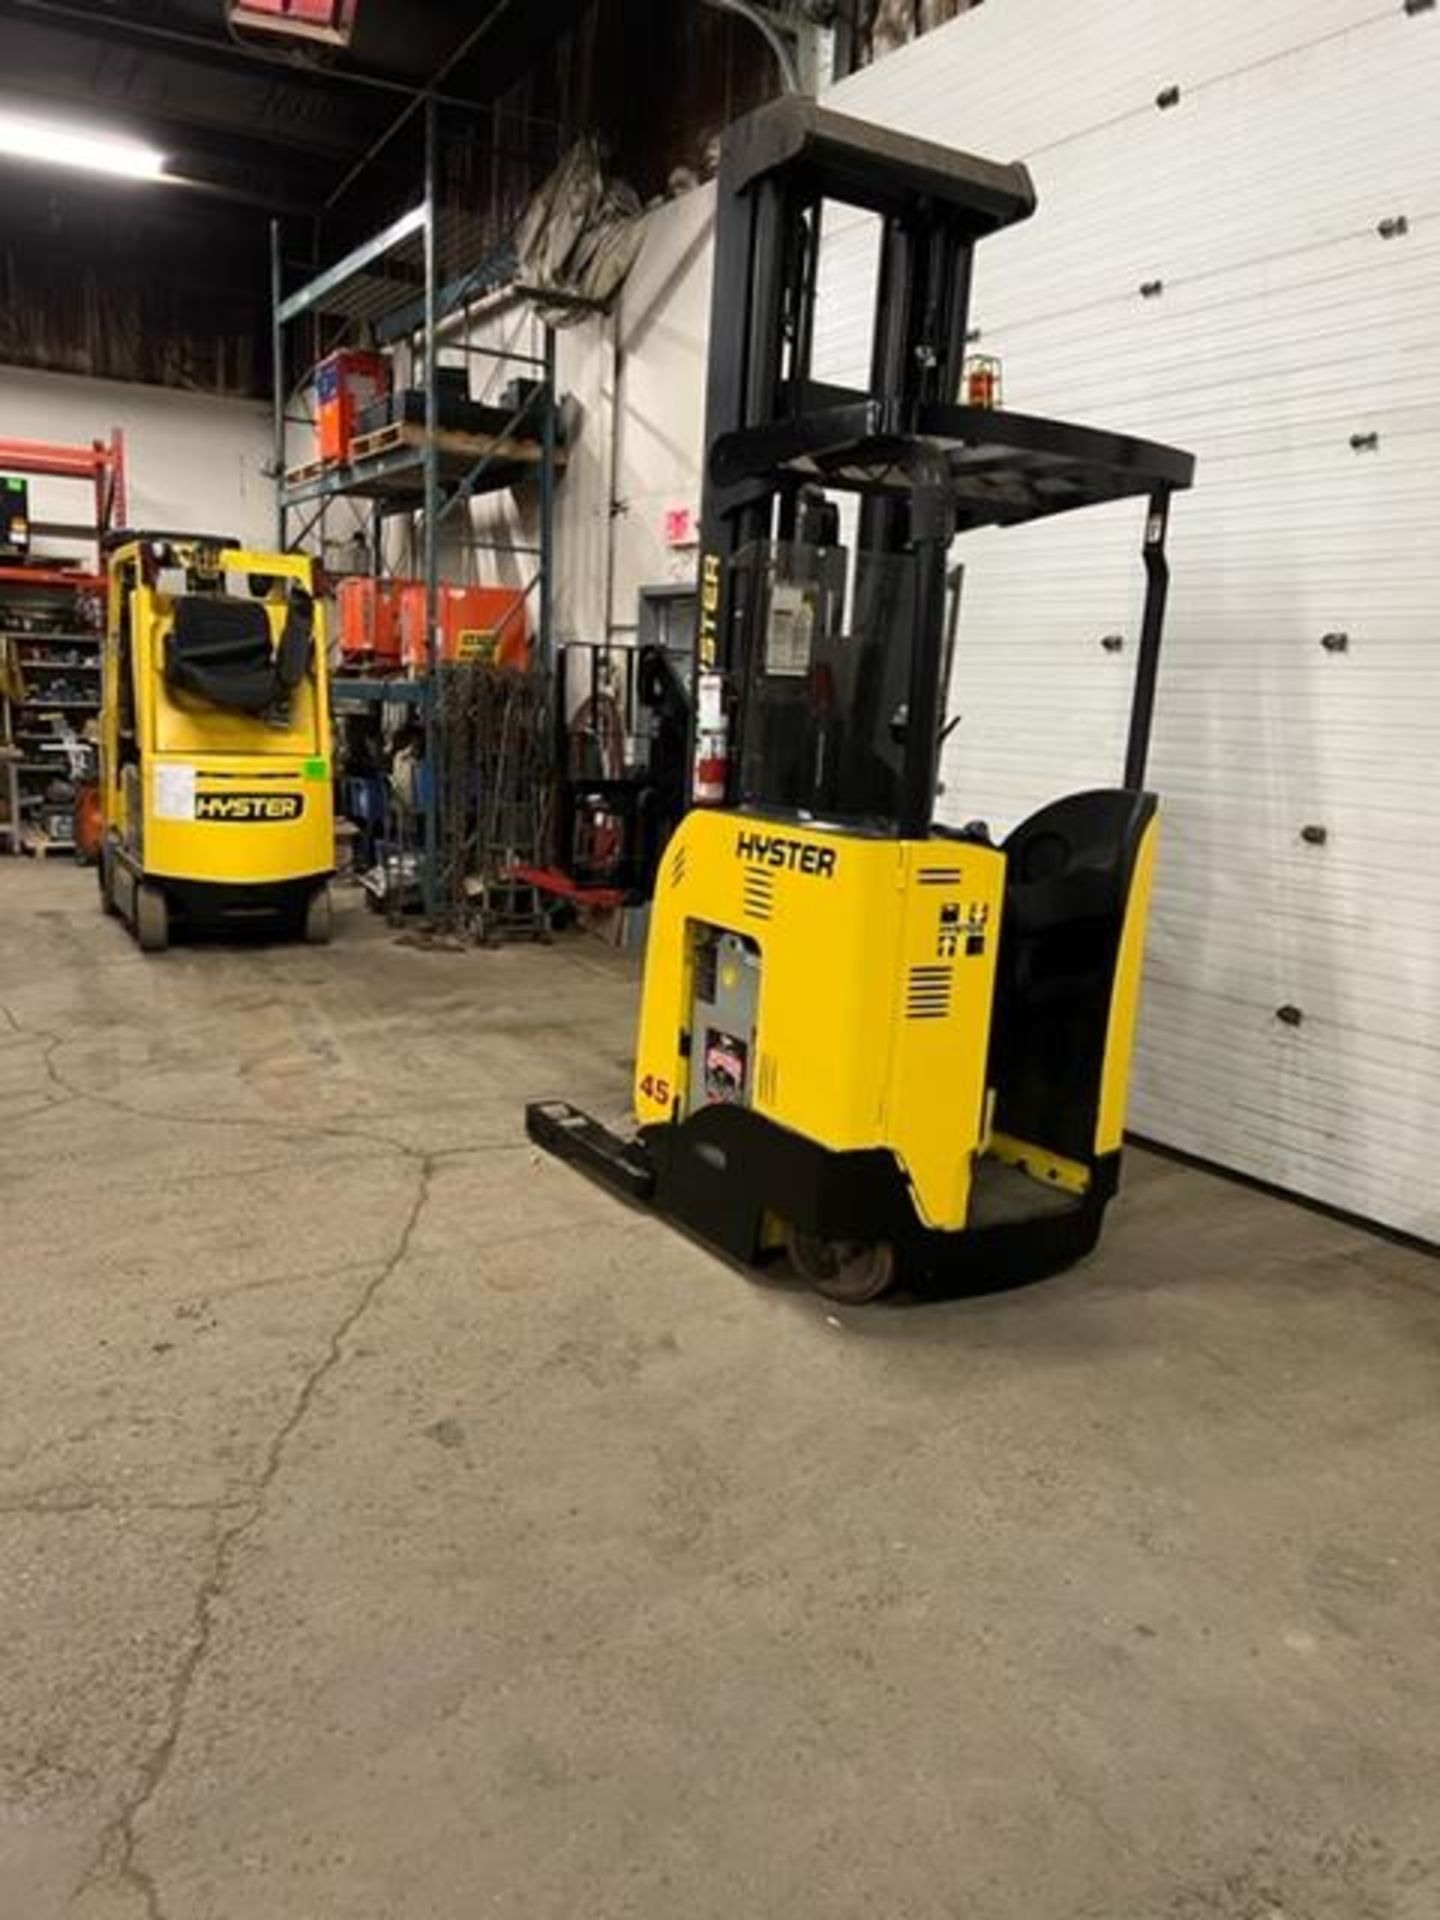 FREE CUSTOMS - 2016 Hyster 45 Reach Truck Pallet Lifter 4500lbs capacity electric MINT machine - Image 4 of 4